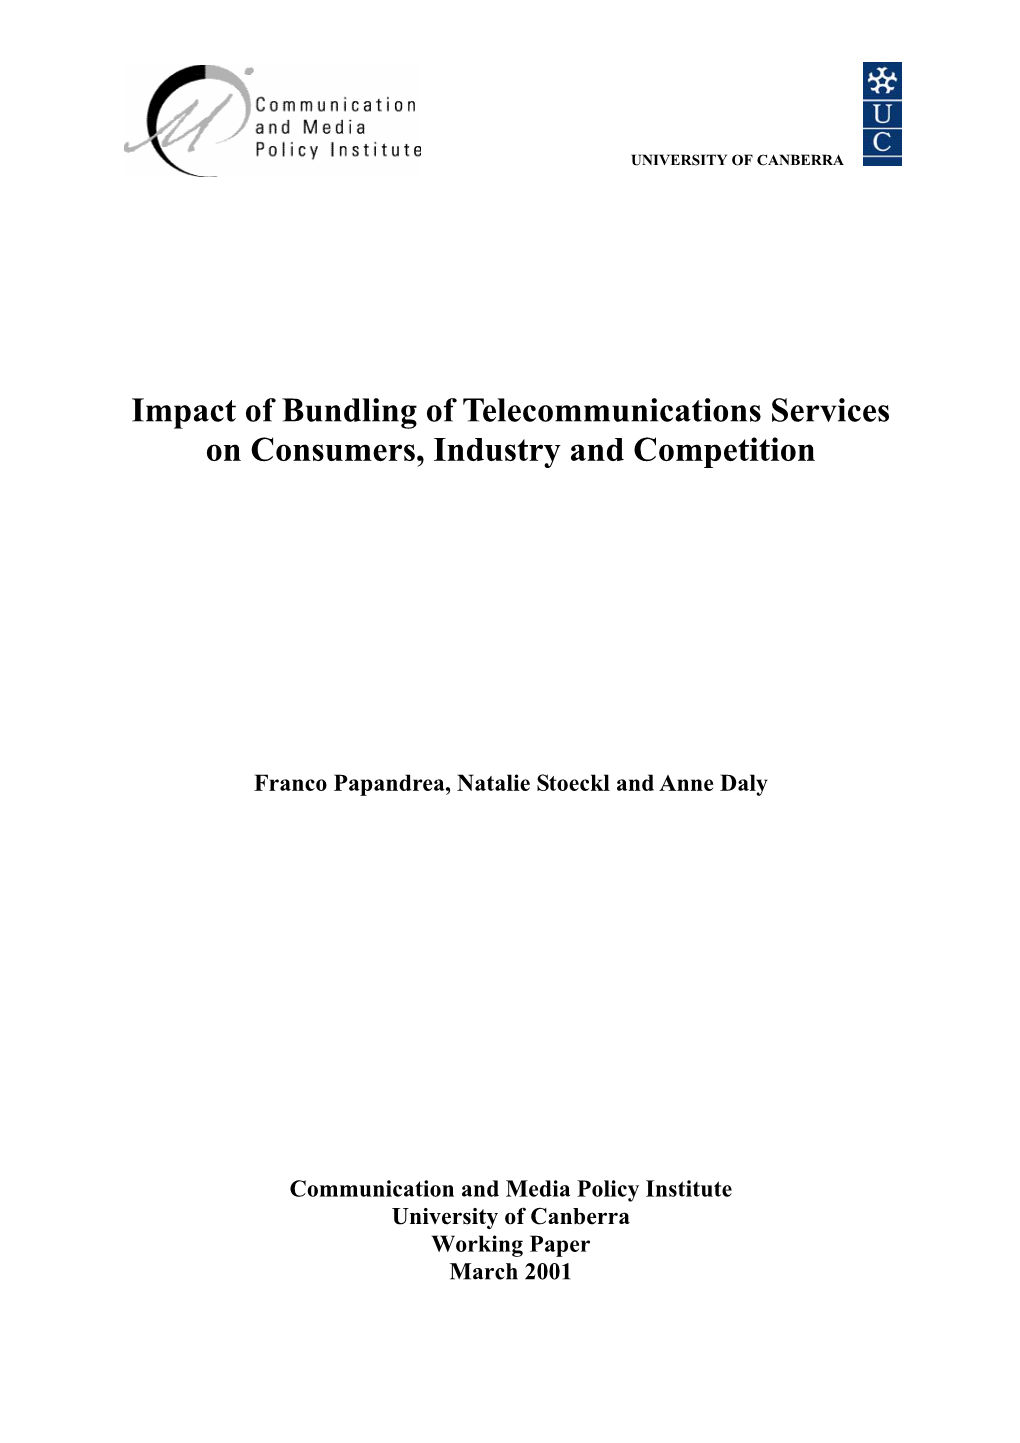 Impact of Bundling of Telecommunications Services on Consumers, Industry and Competition